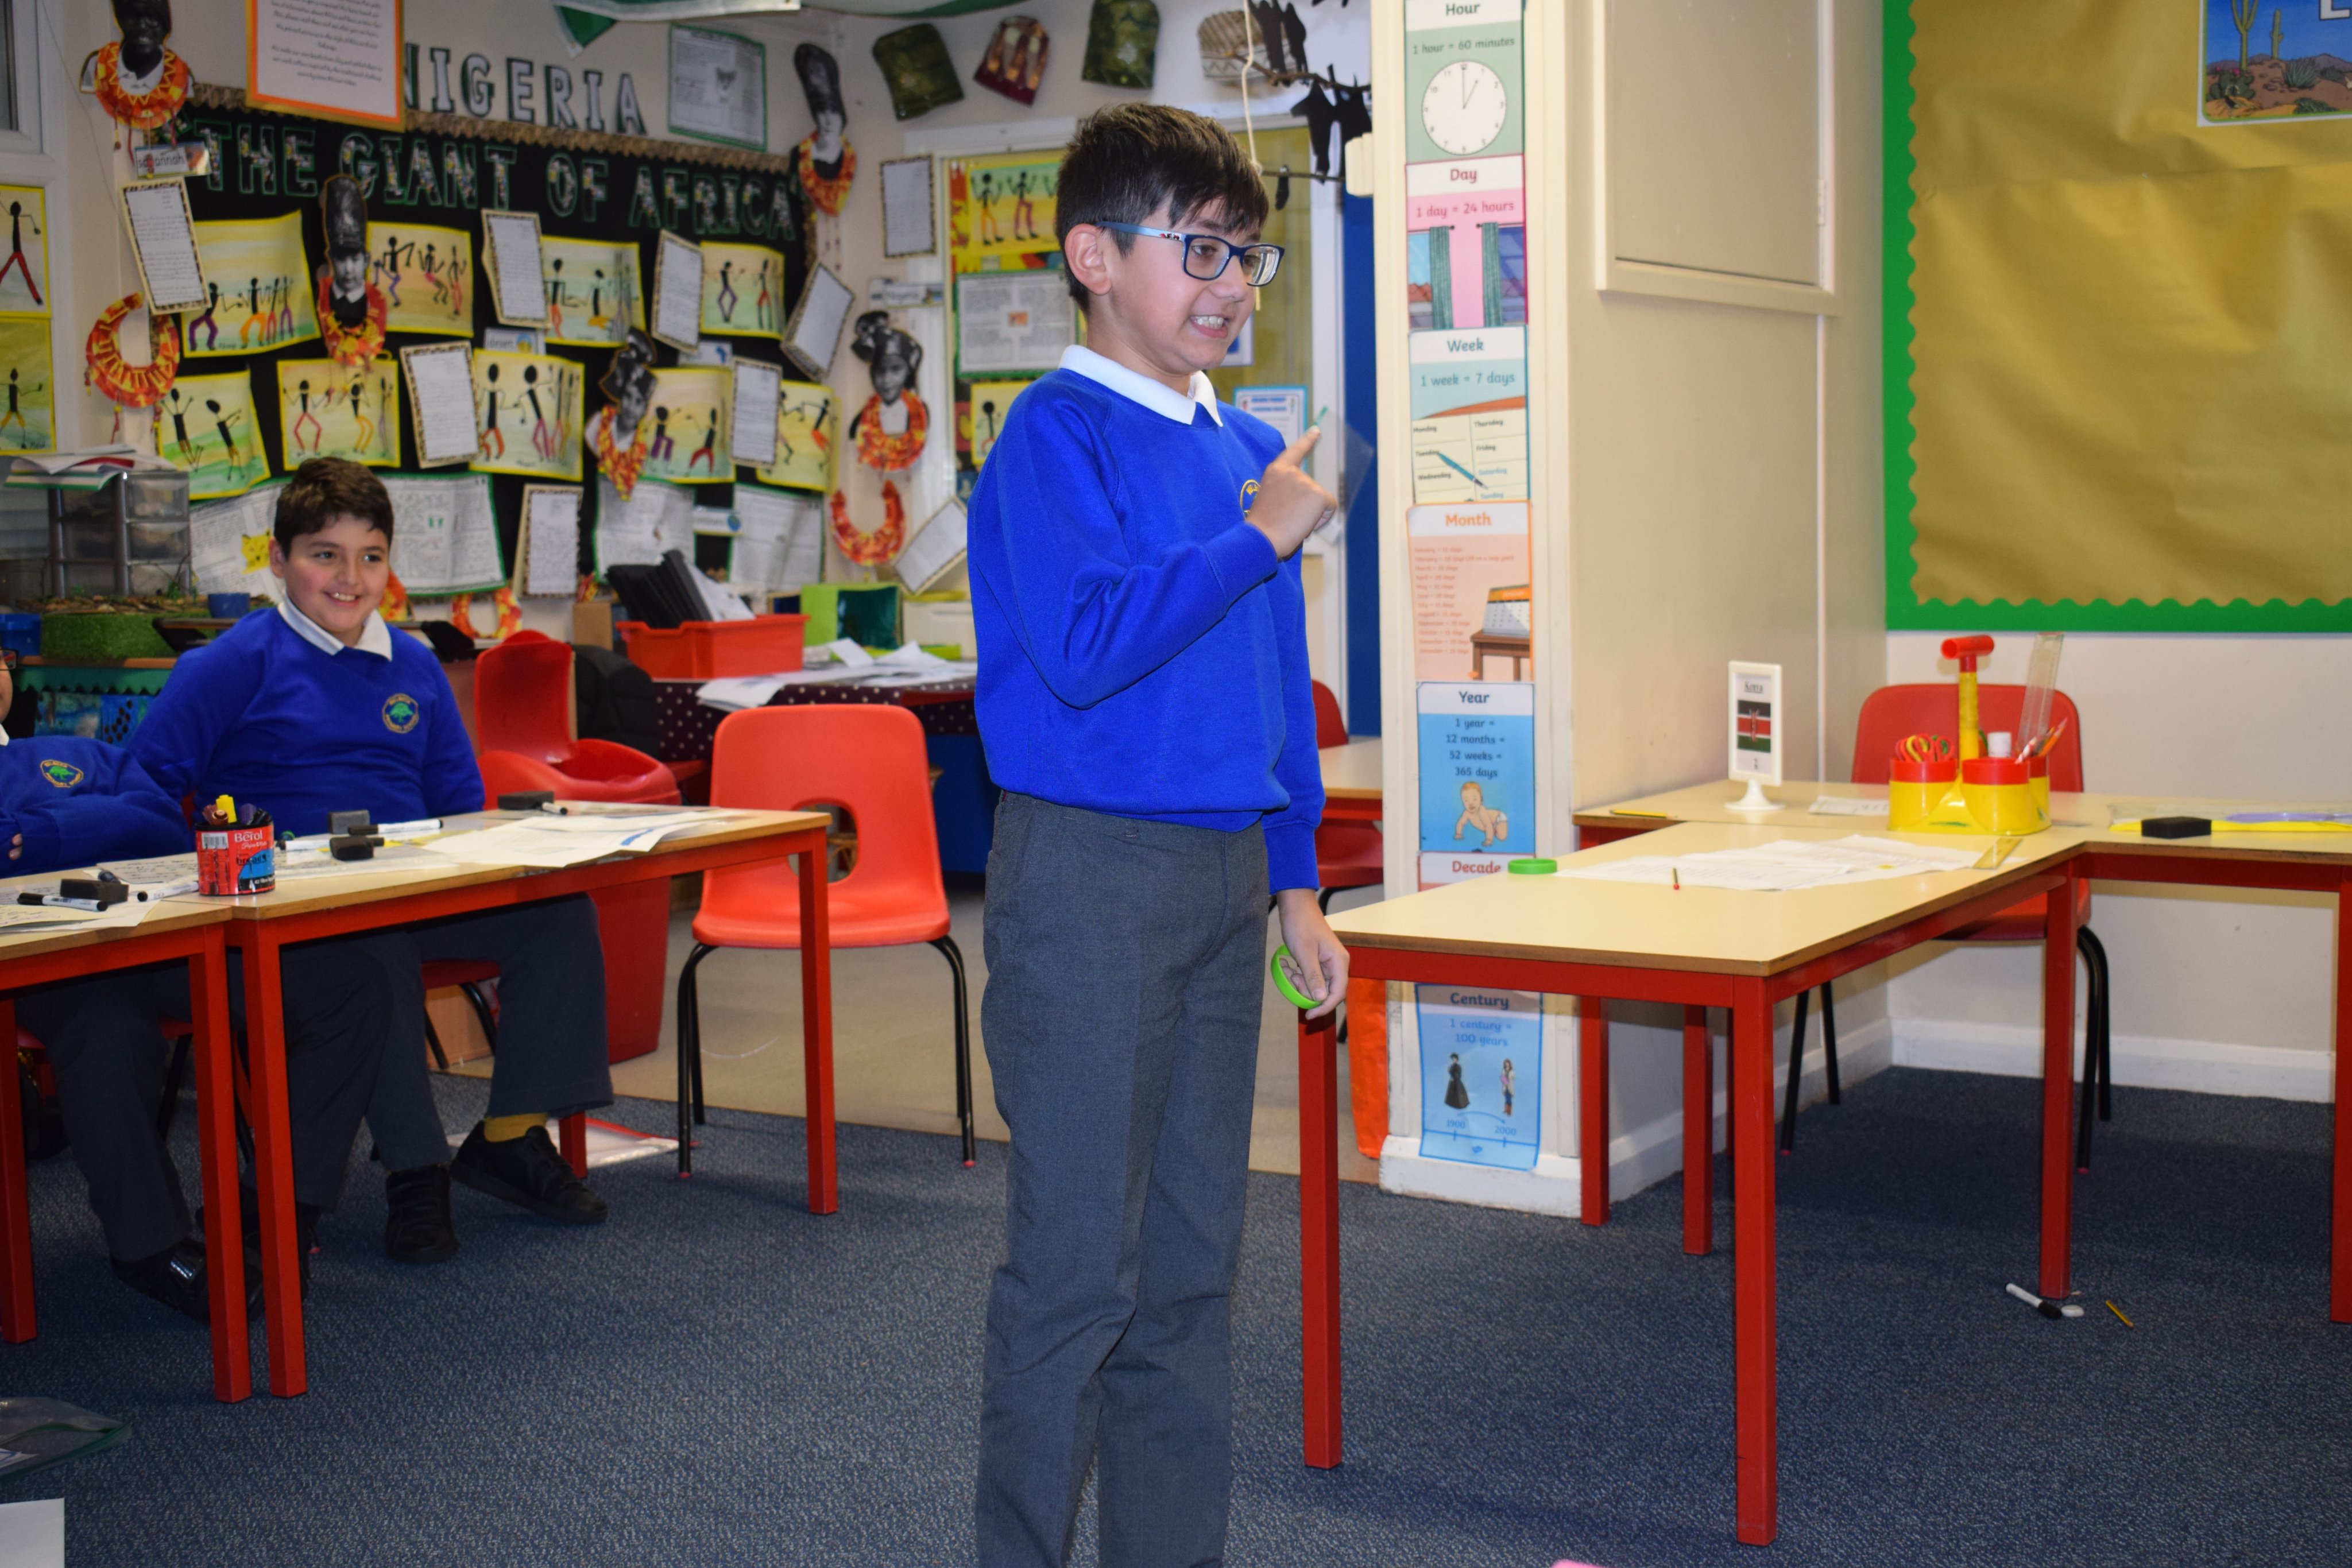 Year 4A – The Big Debate “Should Young Men Fight in the War?”